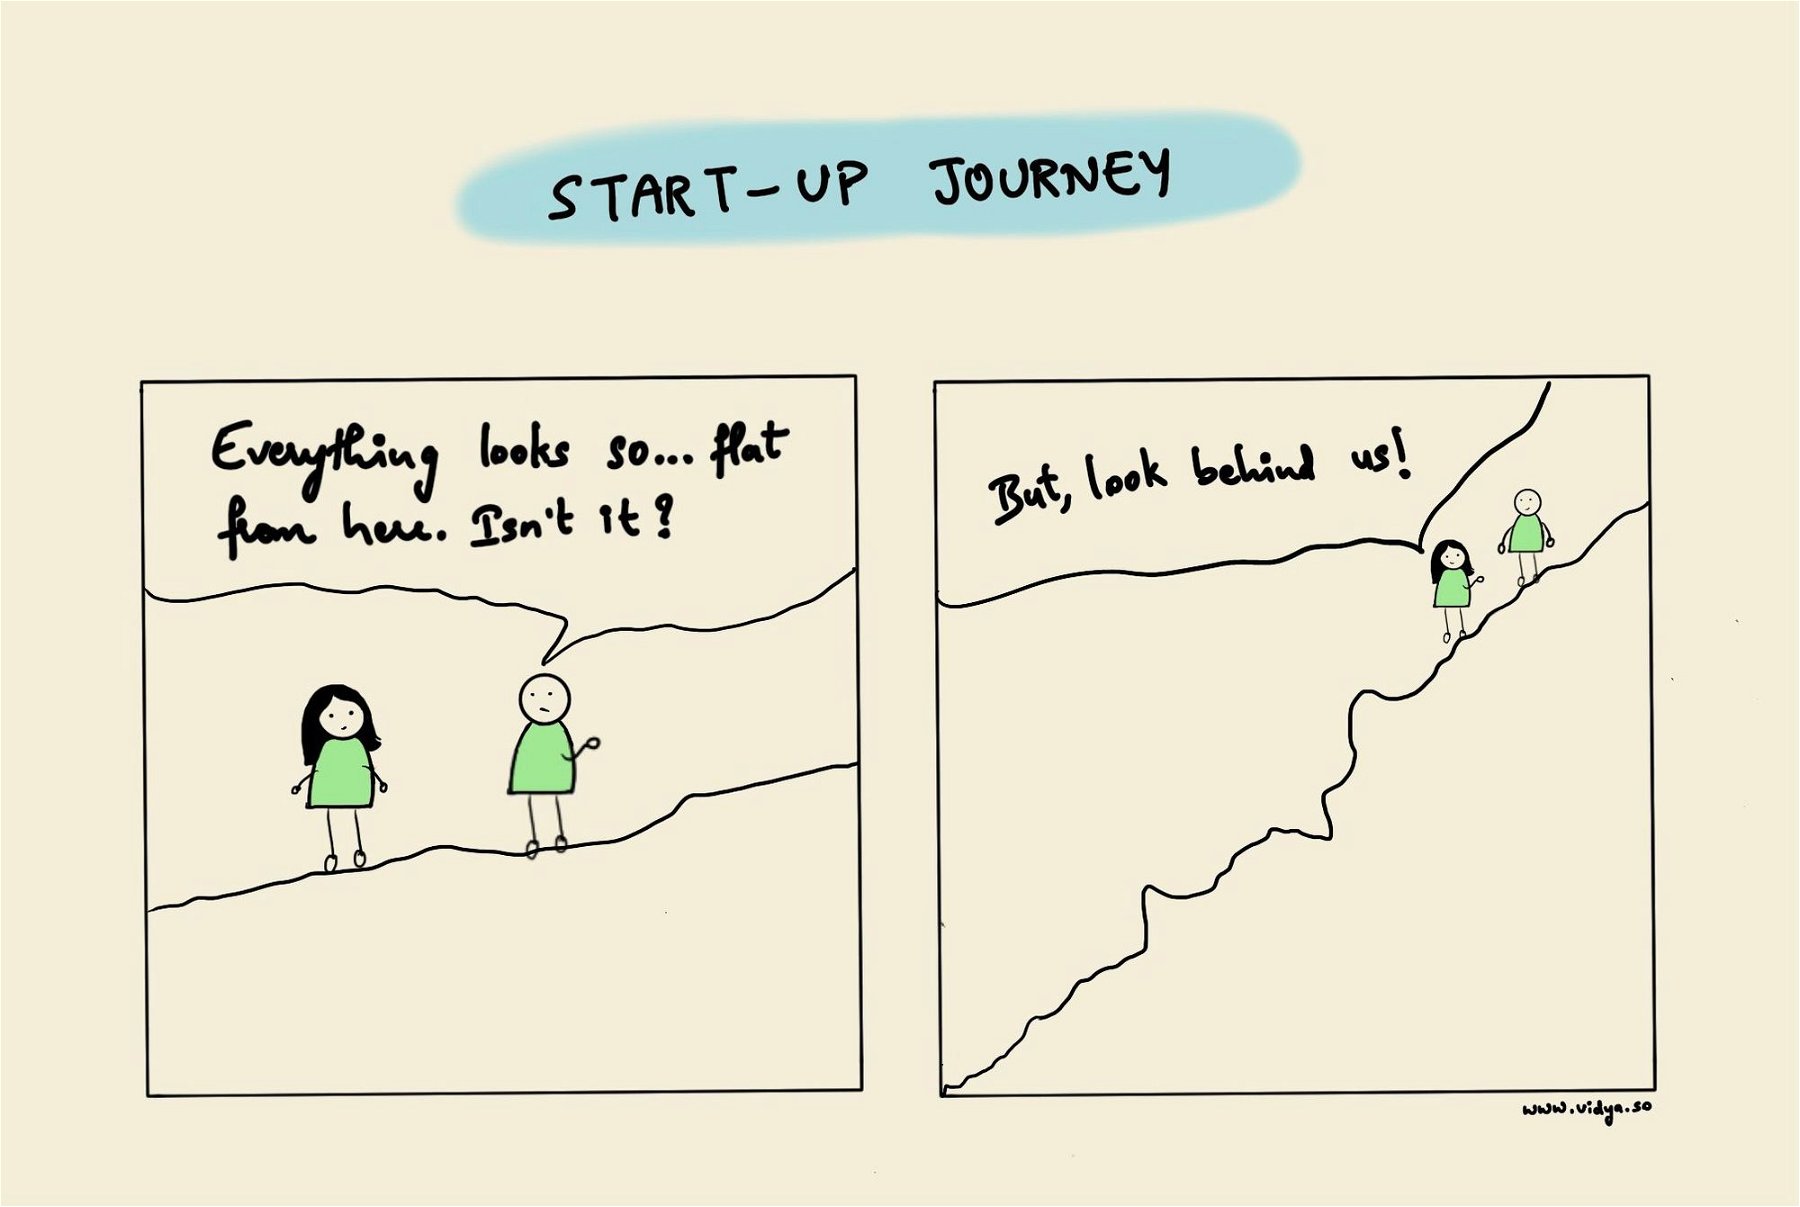 How working on a start-up feels likeâ€¦and why we should zoom out every now and then.